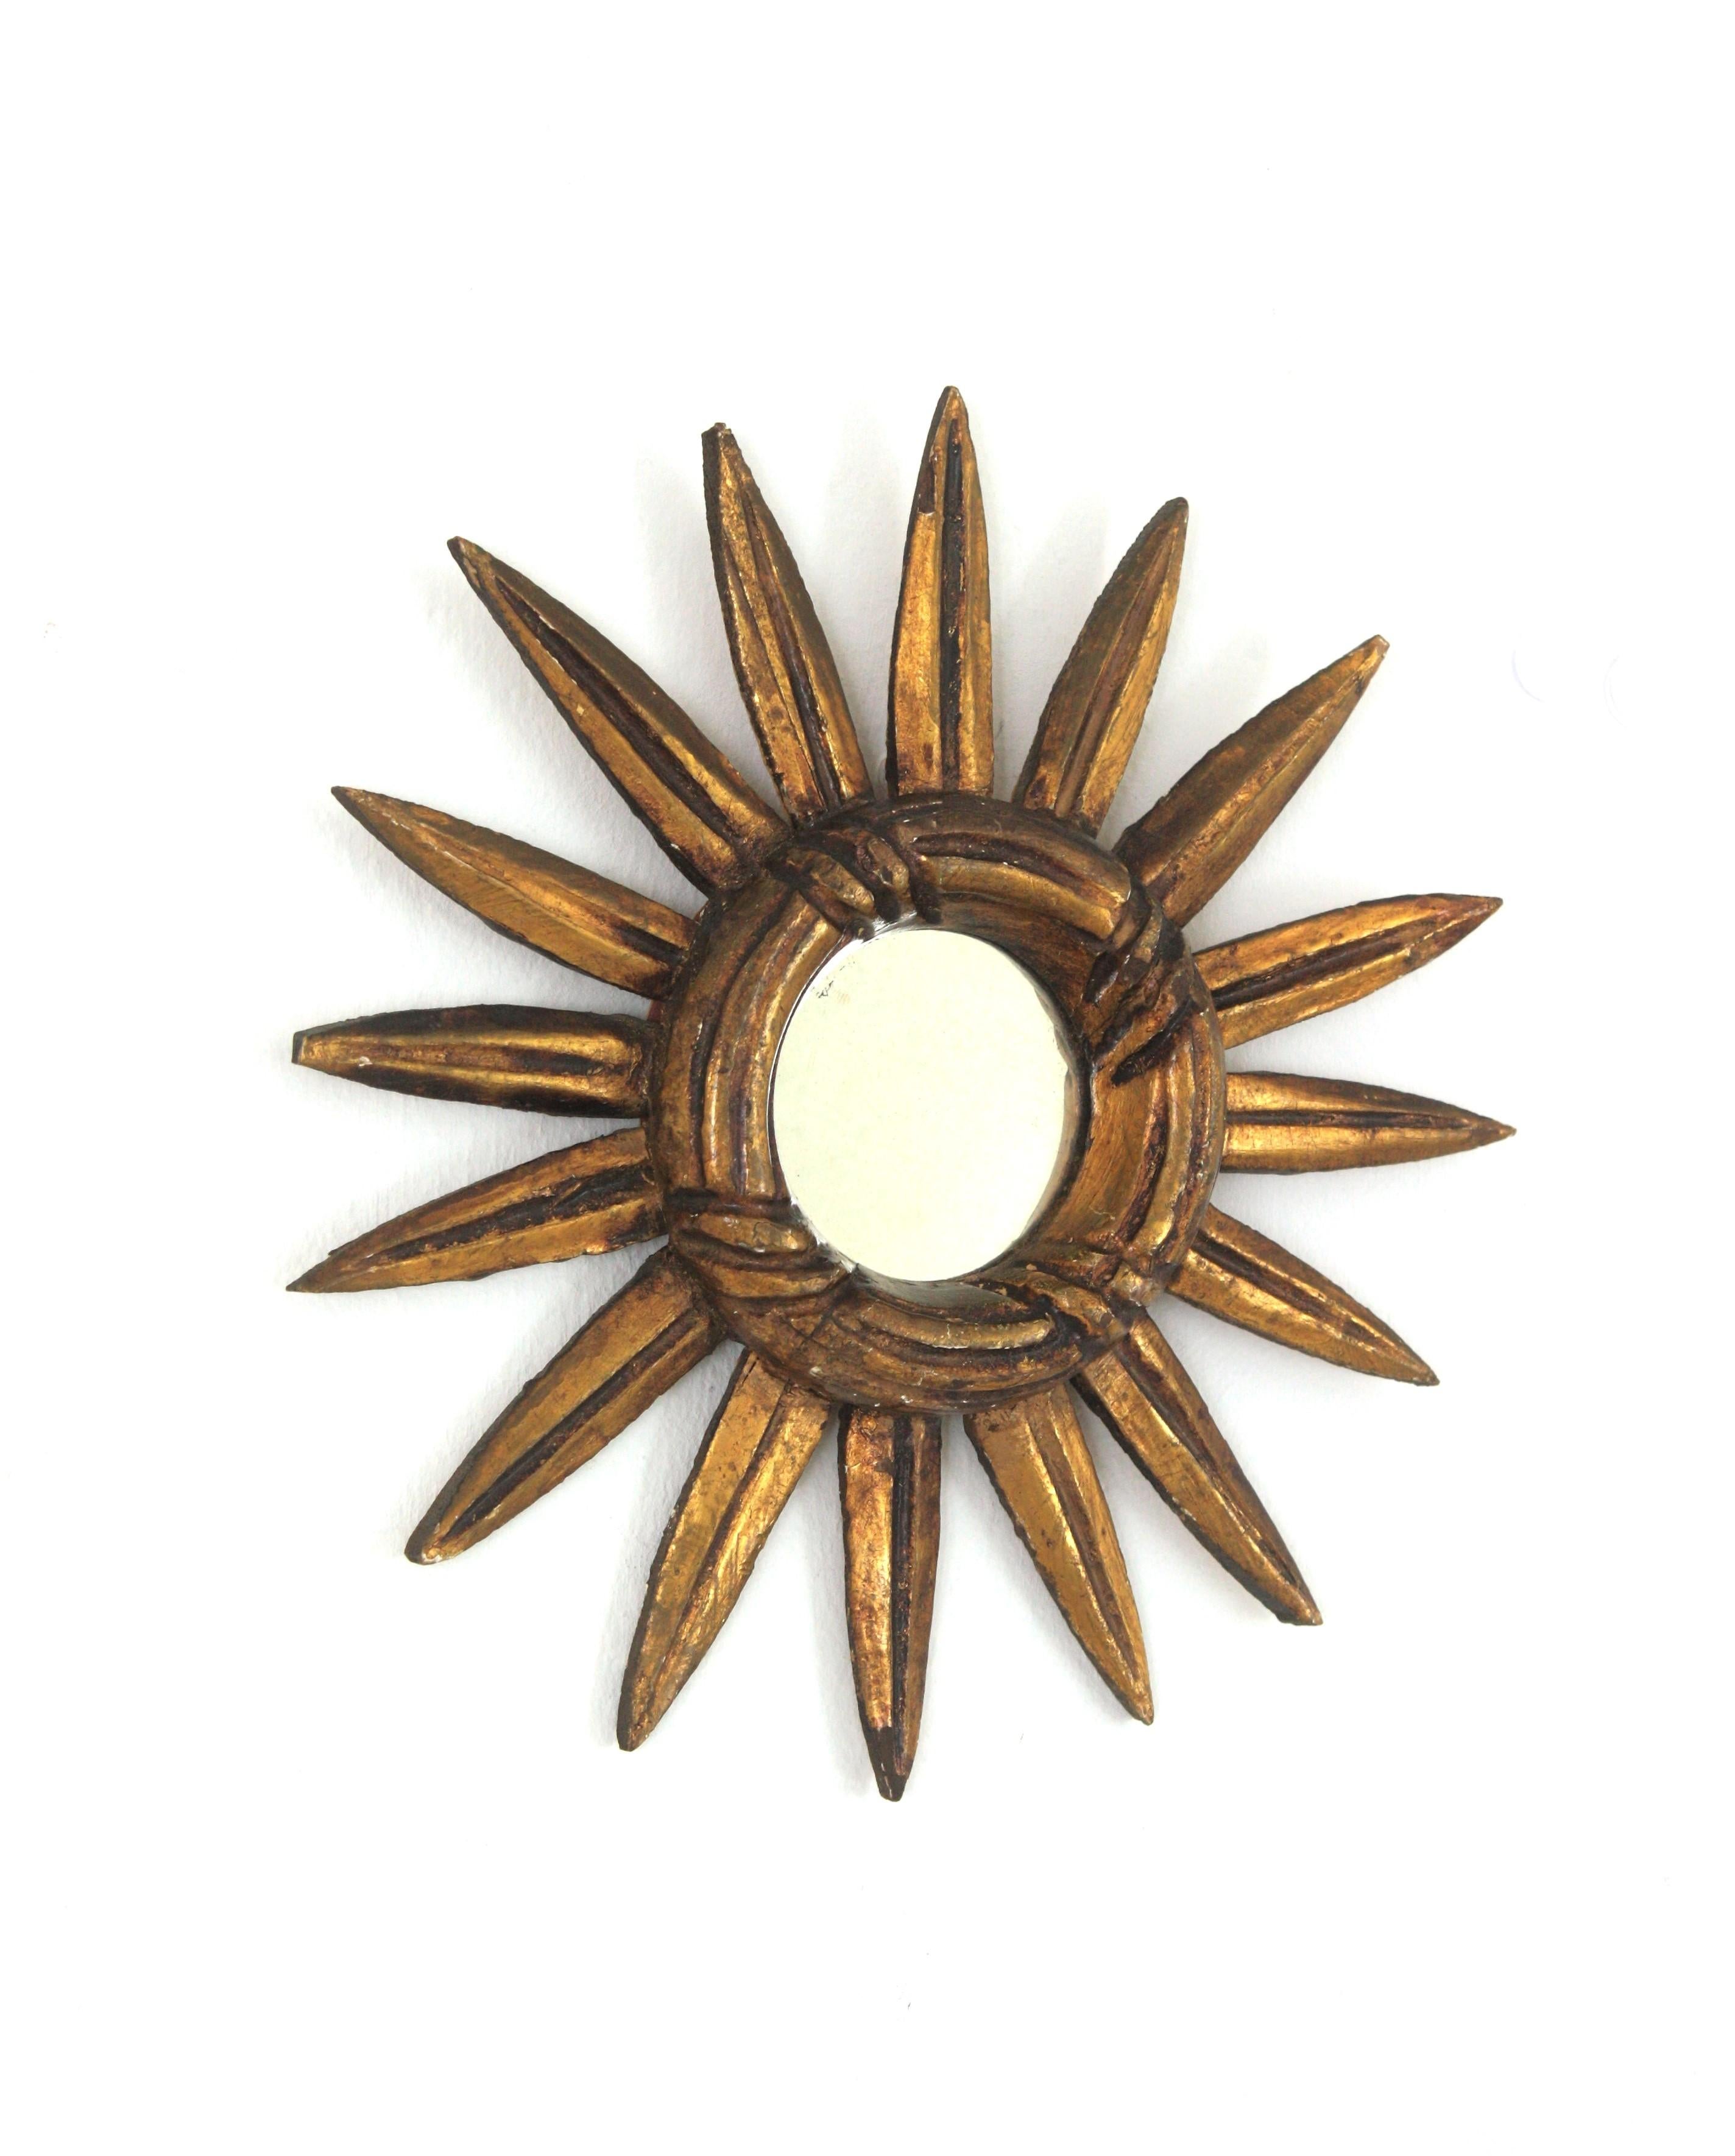 Small scale sunburst mirror in carved giltwood, Spain, 1940-1950s.
Mini sized sunburst mirror in baroque style.
It has a carved ring with stripes and carving details on the rays.
Finished in dark gold leaf gilding and showing a terrific aged